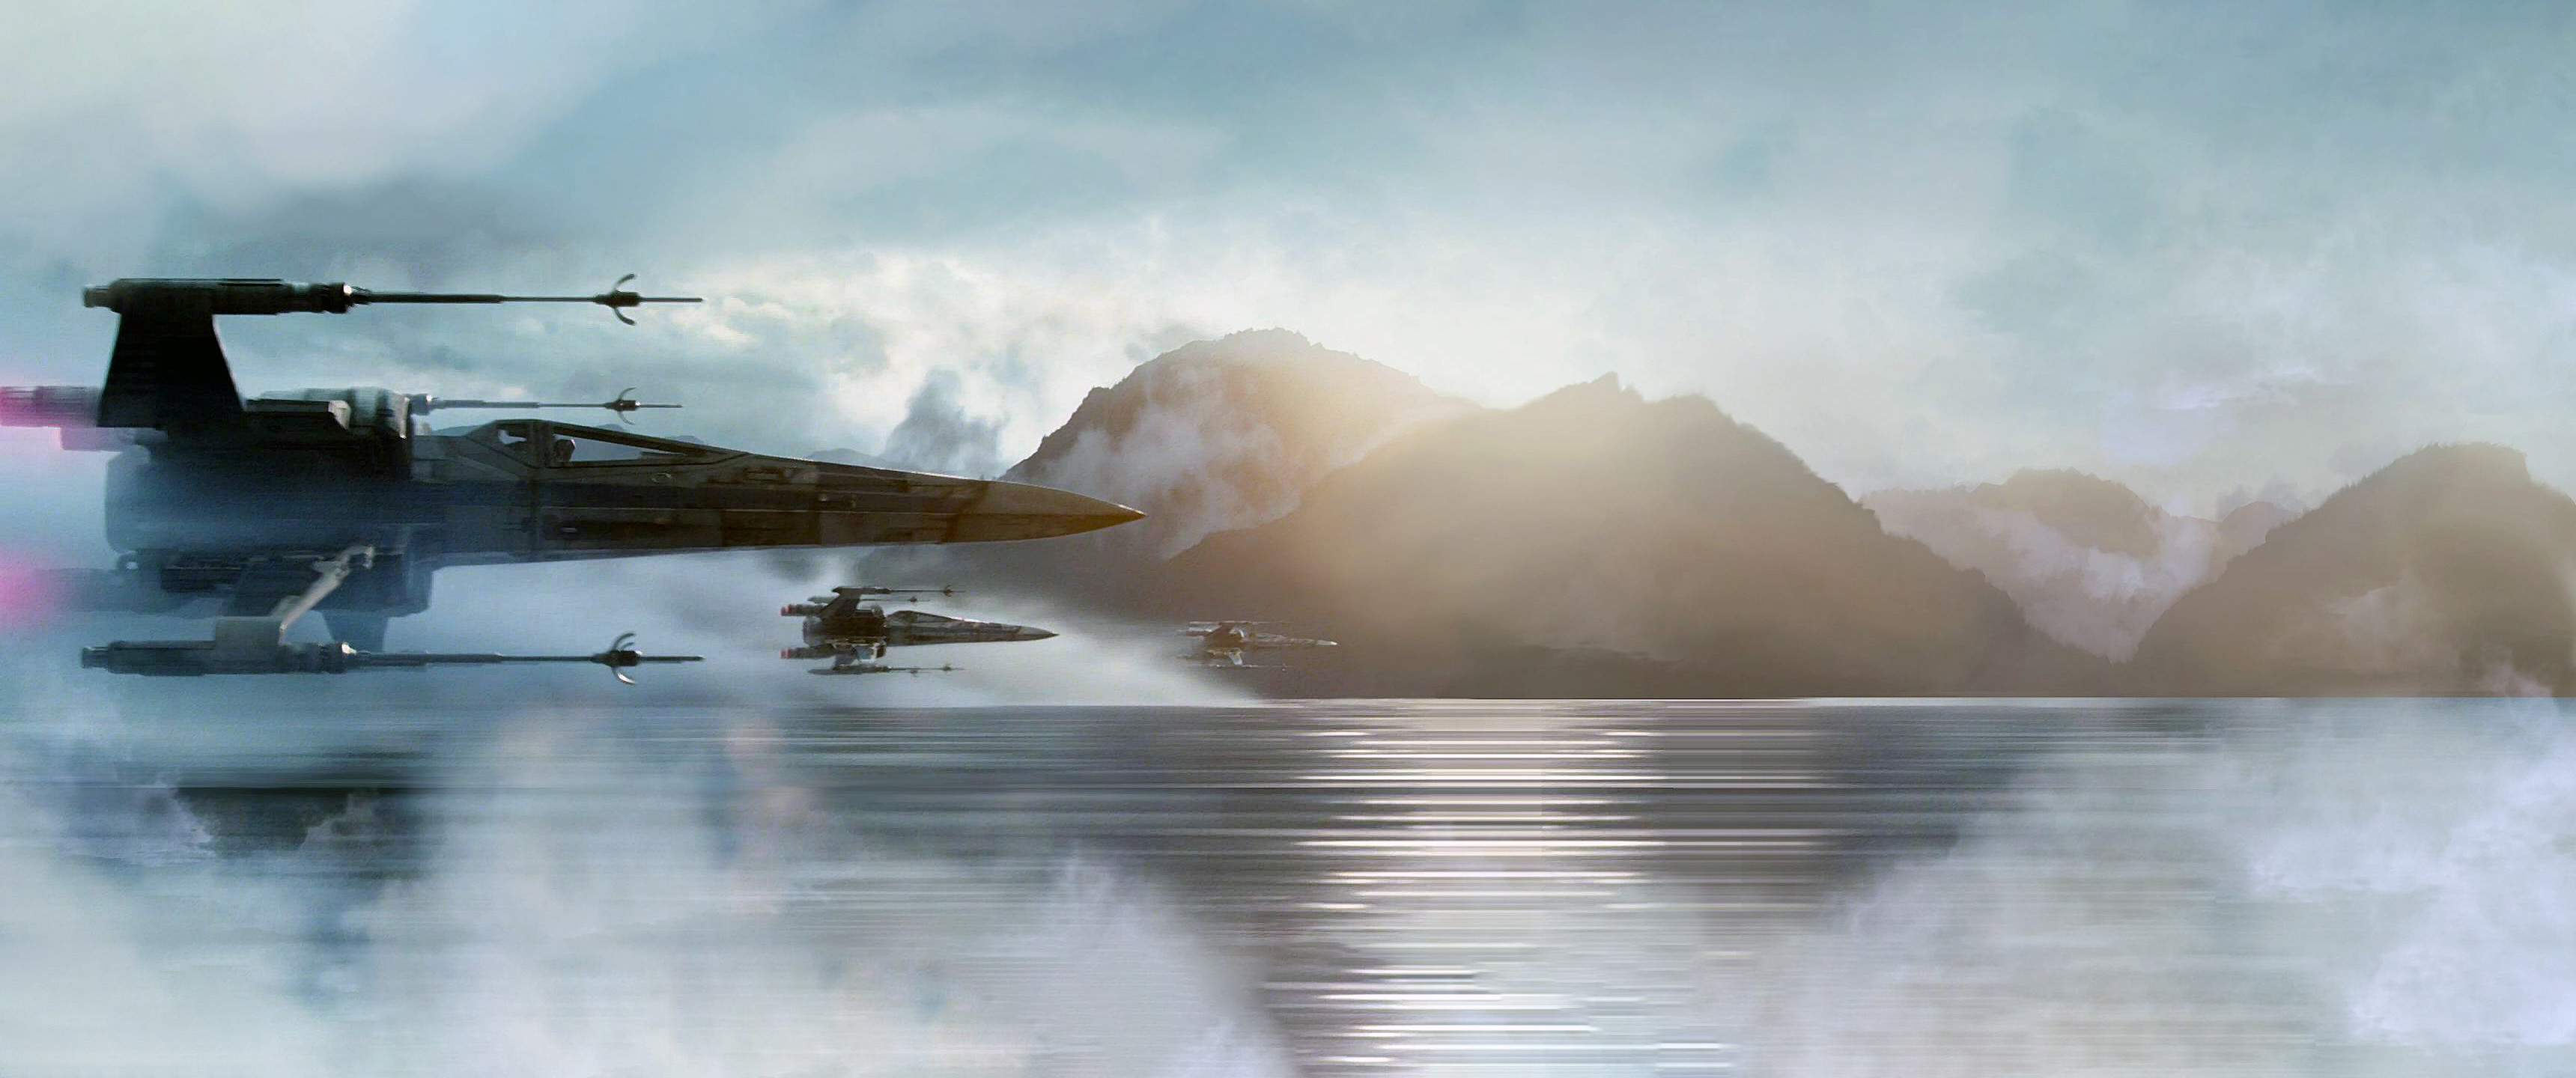 3440x1440 [] X-Wing from Star Wars: The Force Awakens